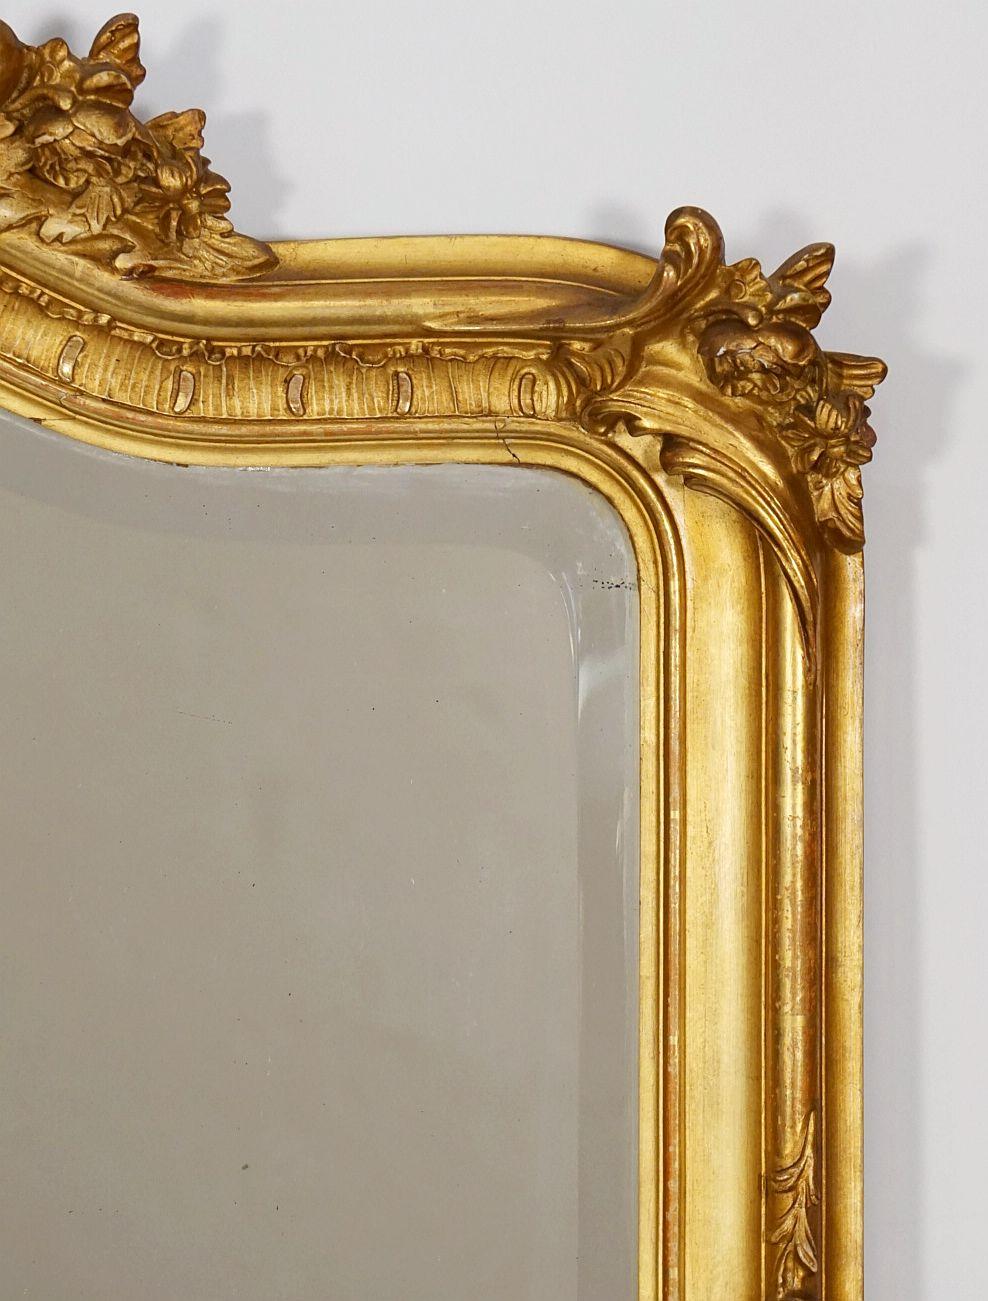 Large French Gilt Pier Mirror from the 19th Century (H 56 x W 37) For Sale 5